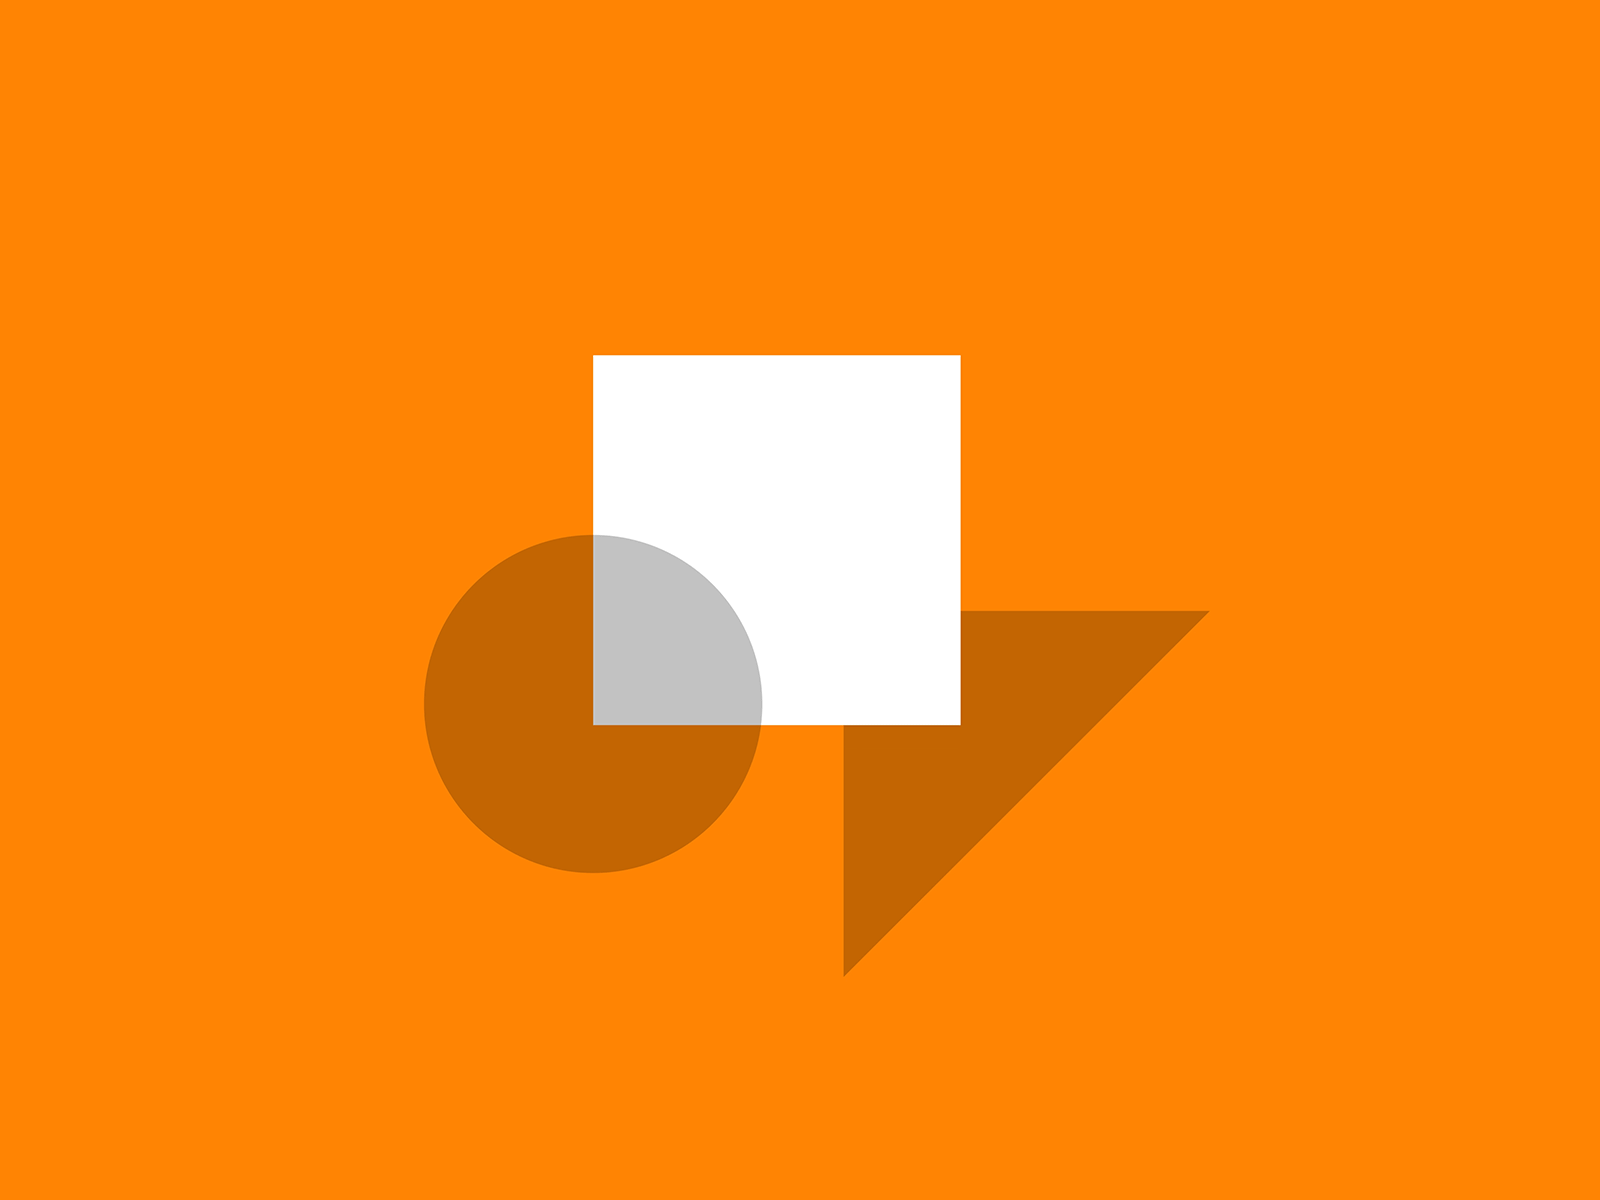 Imagin.ed animated icon after effects animated gif animated icon animation design education geometric gif graphic graphic design icon icon design icons illustration learning design motion graphics online learning orange vector